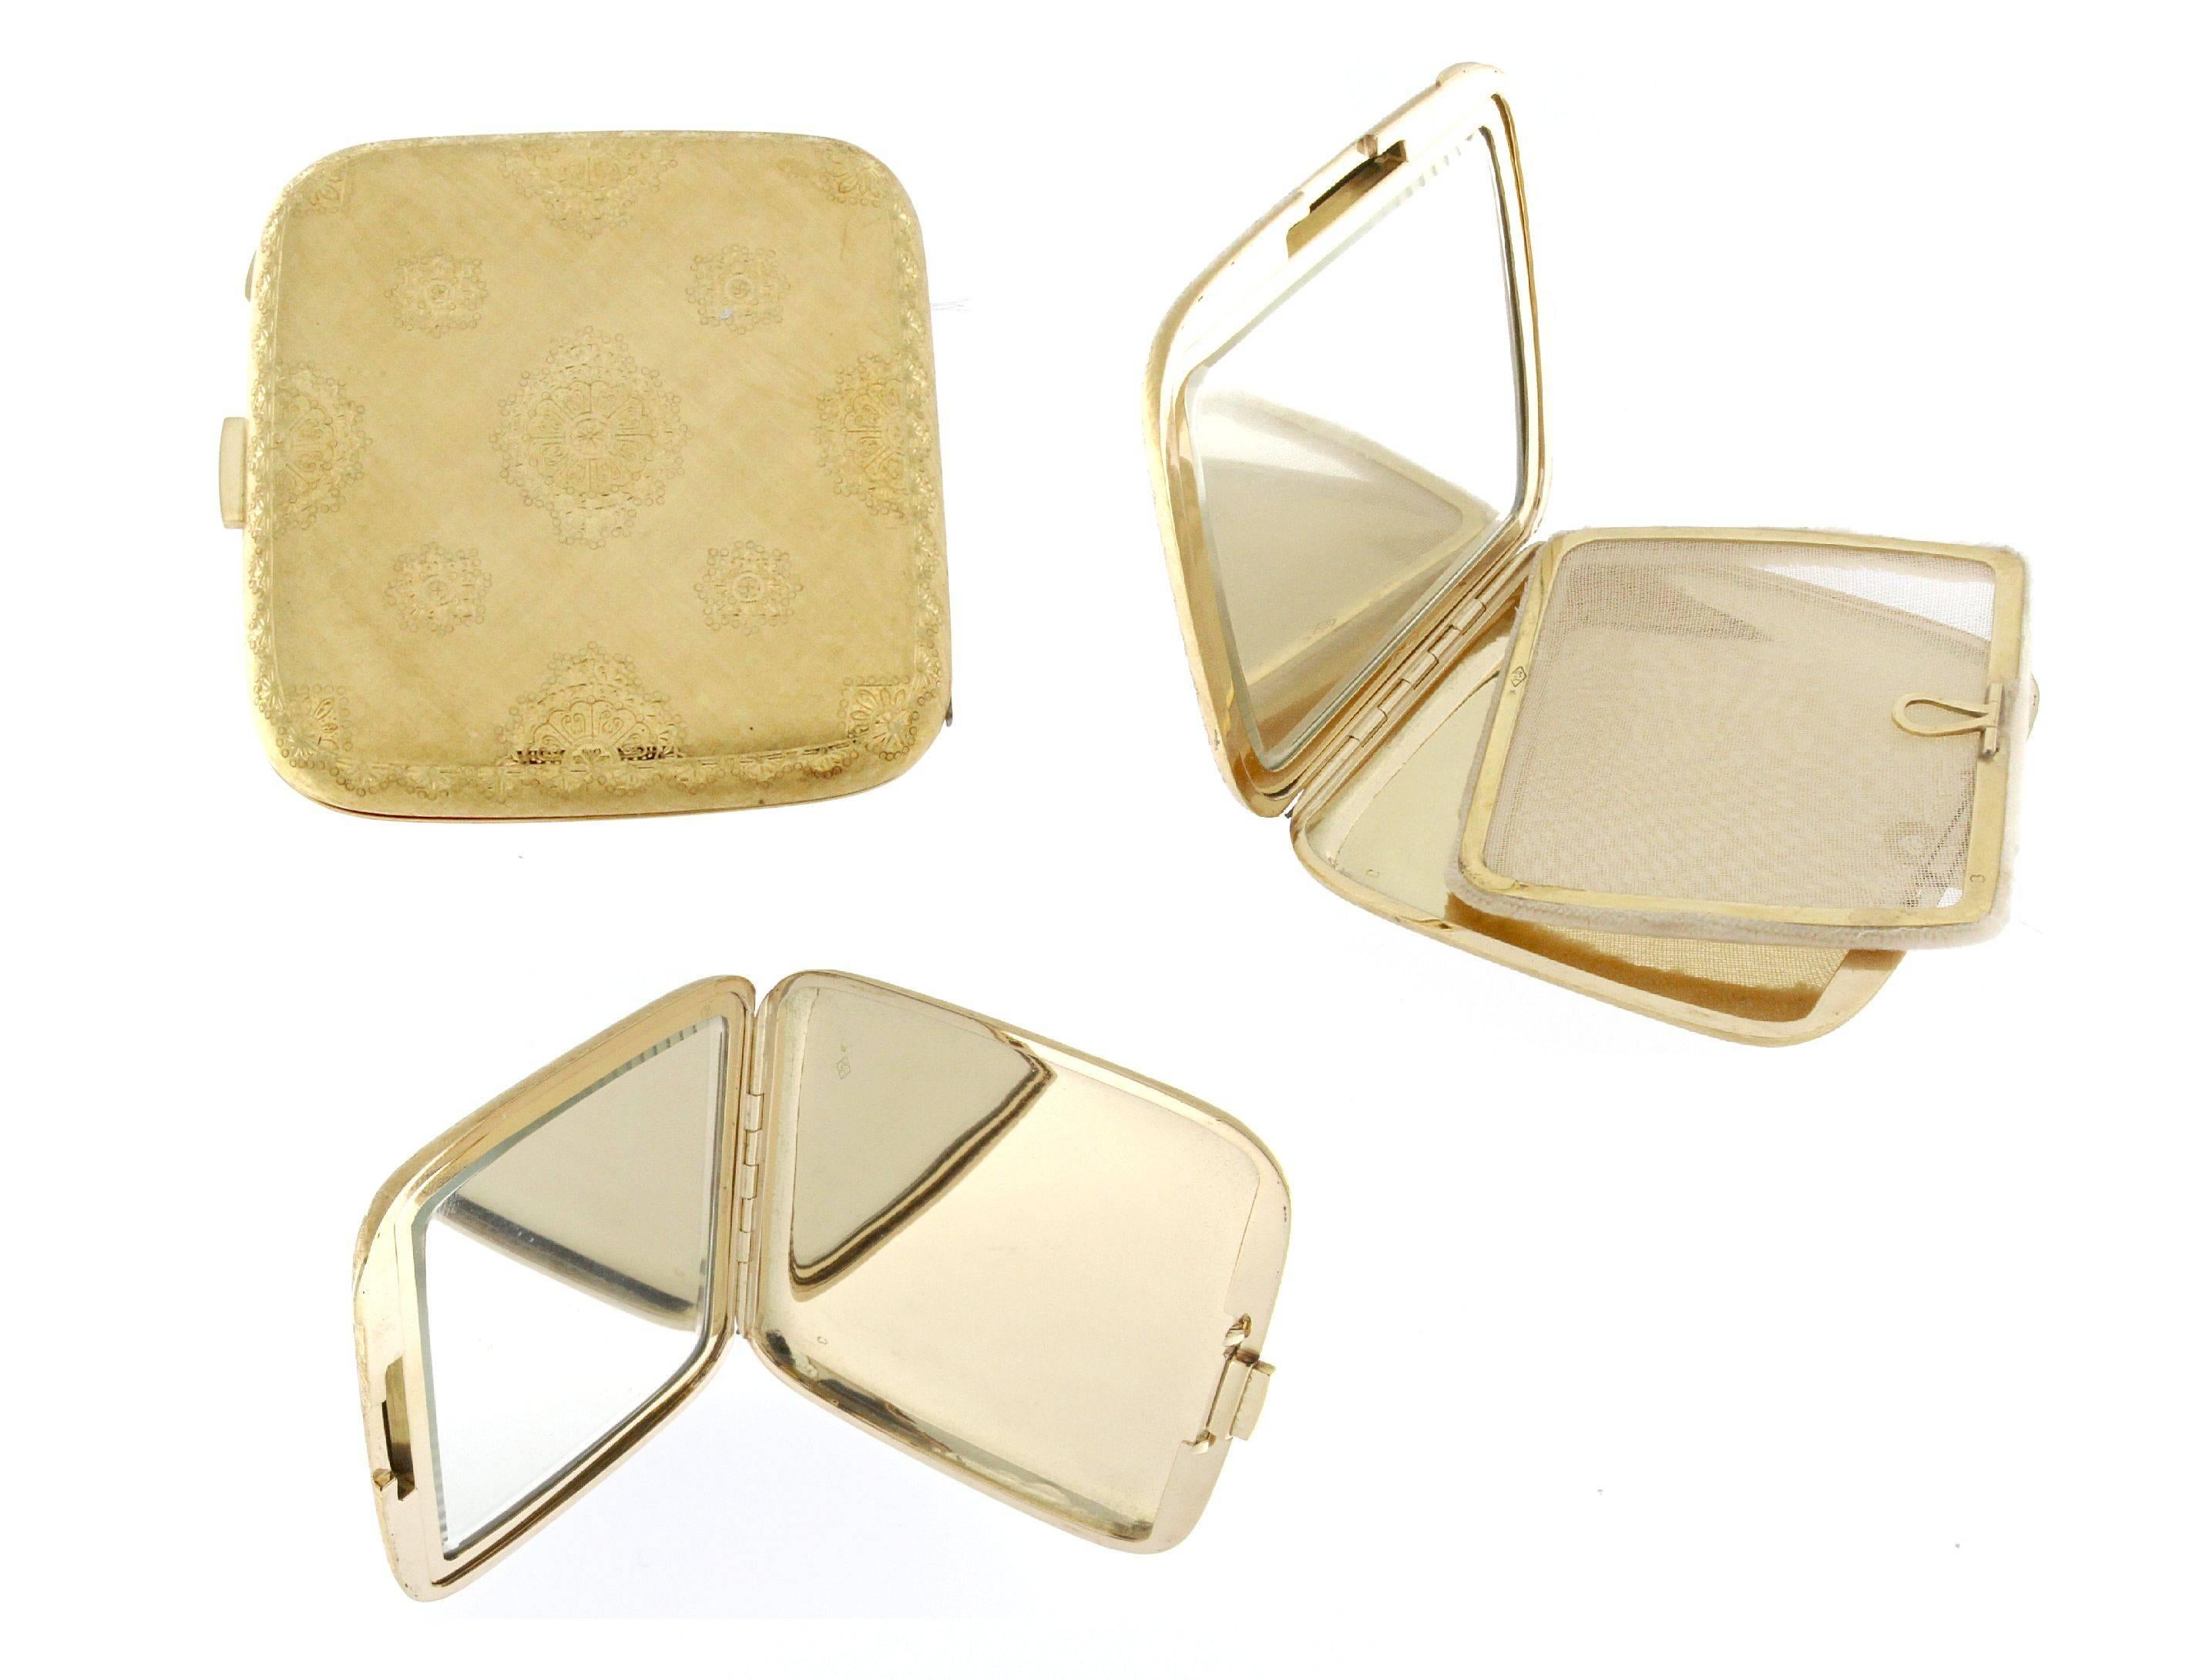 This gold compact has remained to its original splendor as virtually unused
18 kt yellow gold weight: gr  105
Stamp: 750